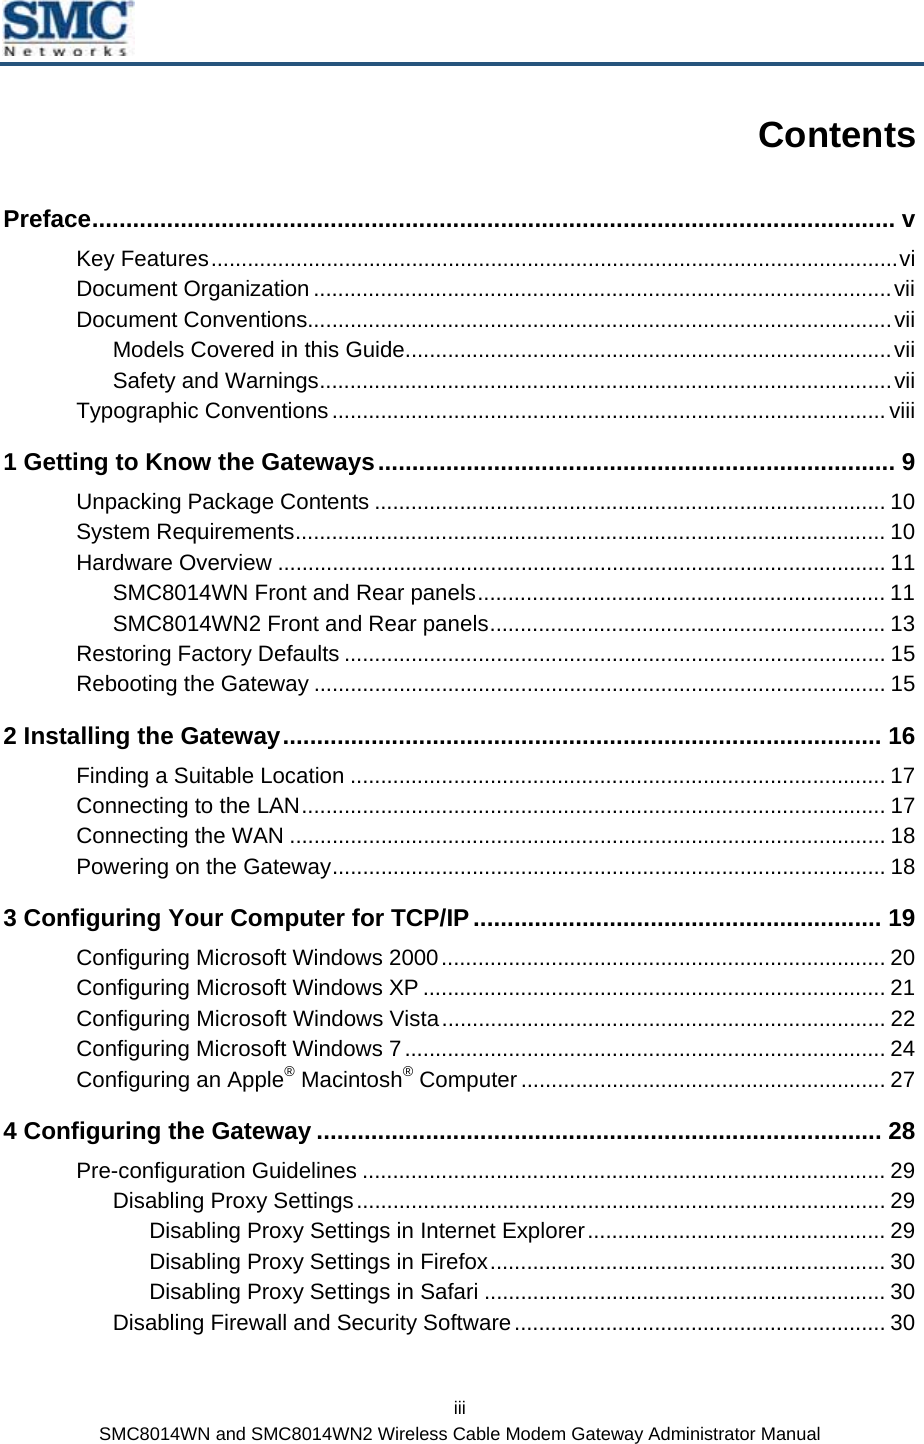  iii SMC8014WN and SMC8014WN2 Wireless Cable Modem Gateway Administrator Manual Contents Preface...................................................................................................................... v Key Features.................................................................................................................vi Document Organization ...............................................................................................vii Document Conventions................................................................................................vii Models Covered in this Guide................................................................................vii Safety and Warnings..............................................................................................vii Typographic Conventions ........................................................................................... viii 1 Getting to Know the Gateways............................................................................ 9 Unpacking Package Contents .................................................................................... 10 System Requirements................................................................................................. 10 Hardware Overview .................................................................................................... 11 SMC8014WN Front and Rear panels................................................................... 11 SMC8014WN2 Front and Rear panels................................................................. 13 Restoring Factory Defaults ......................................................................................... 15 Rebooting the Gateway .............................................................................................. 15 2 Installing the Gateway........................................................................................ 16 Finding a Suitable Location ........................................................................................ 17 Connecting to the LAN................................................................................................ 17 Connecting the WAN .................................................................................................. 18 Powering on the Gateway........................................................................................... 18 3 Configuring Your Computer for TCP/IP ............................................................ 19 Configuring Microsoft Windows 2000......................................................................... 20 Configuring Microsoft Windows XP ............................................................................ 21 Configuring Microsoft Windows Vista......................................................................... 22 Configuring Microsoft Windows 7............................................................................... 24 Configuring an Apple® Macintosh® Computer ............................................................ 27 4 Configuring the Gateway ................................................................................... 28 Pre-configuration Guidelines ...................................................................................... 29 Disabling Proxy Settings....................................................................................... 29 Disabling Proxy Settings in Internet Explorer................................................. 29 Disabling Proxy Settings in Firefox................................................................. 30 Disabling Proxy Settings in Safari .................................................................. 30 Disabling Firewall and Security Software............................................................. 30 